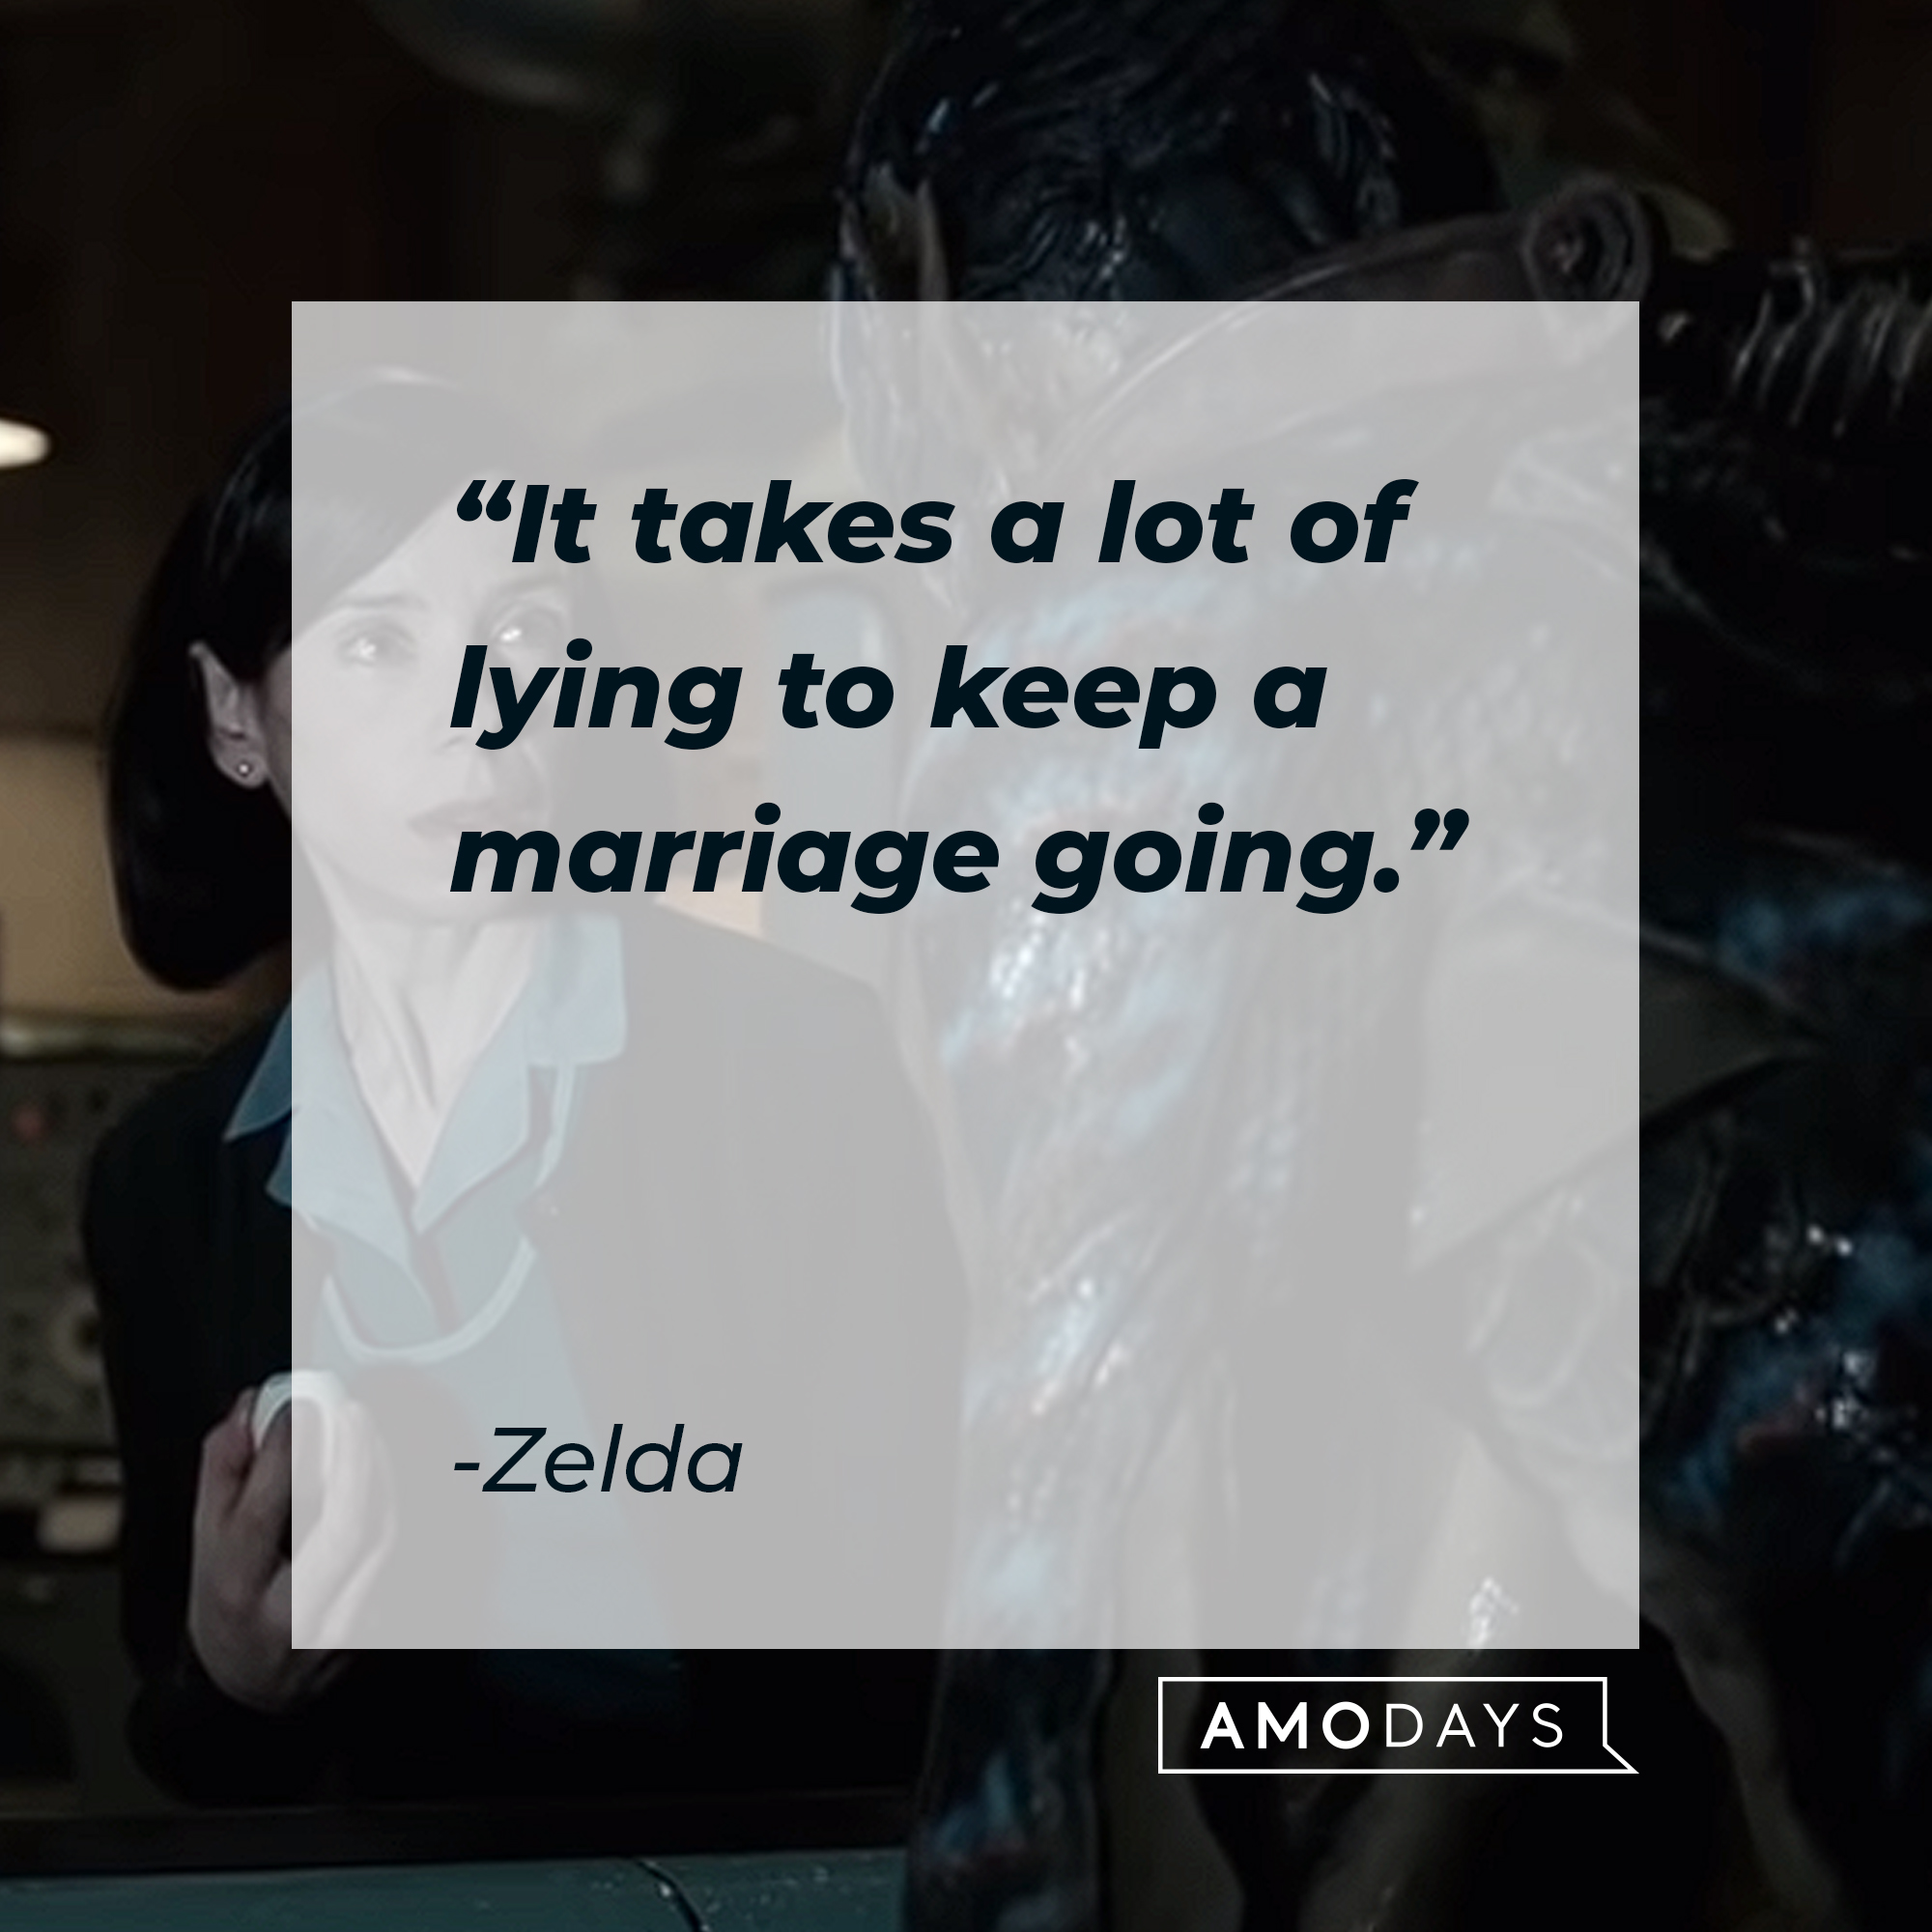 Zelda's quote : “It takes a lot of lying to keep a marriage going.” | Source:youtube.com/searchlightpictures